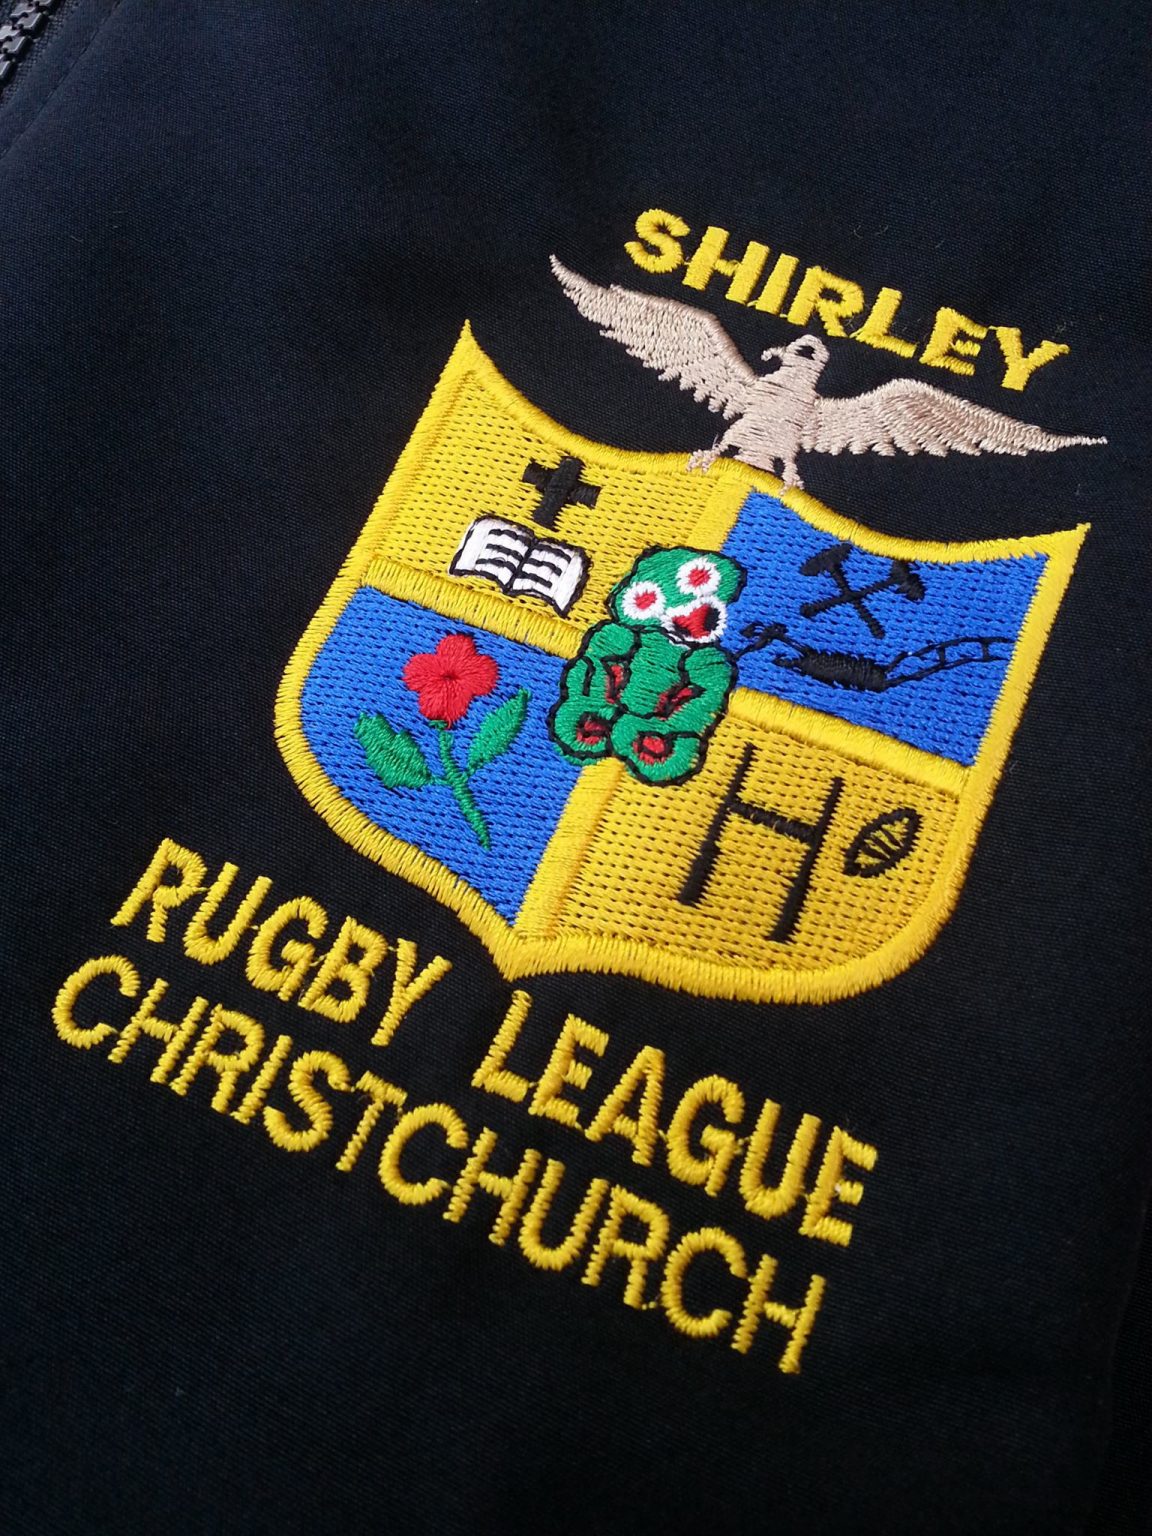 shirley-rugby-league-christchurch-custom-crest-embroidery - Southern ...